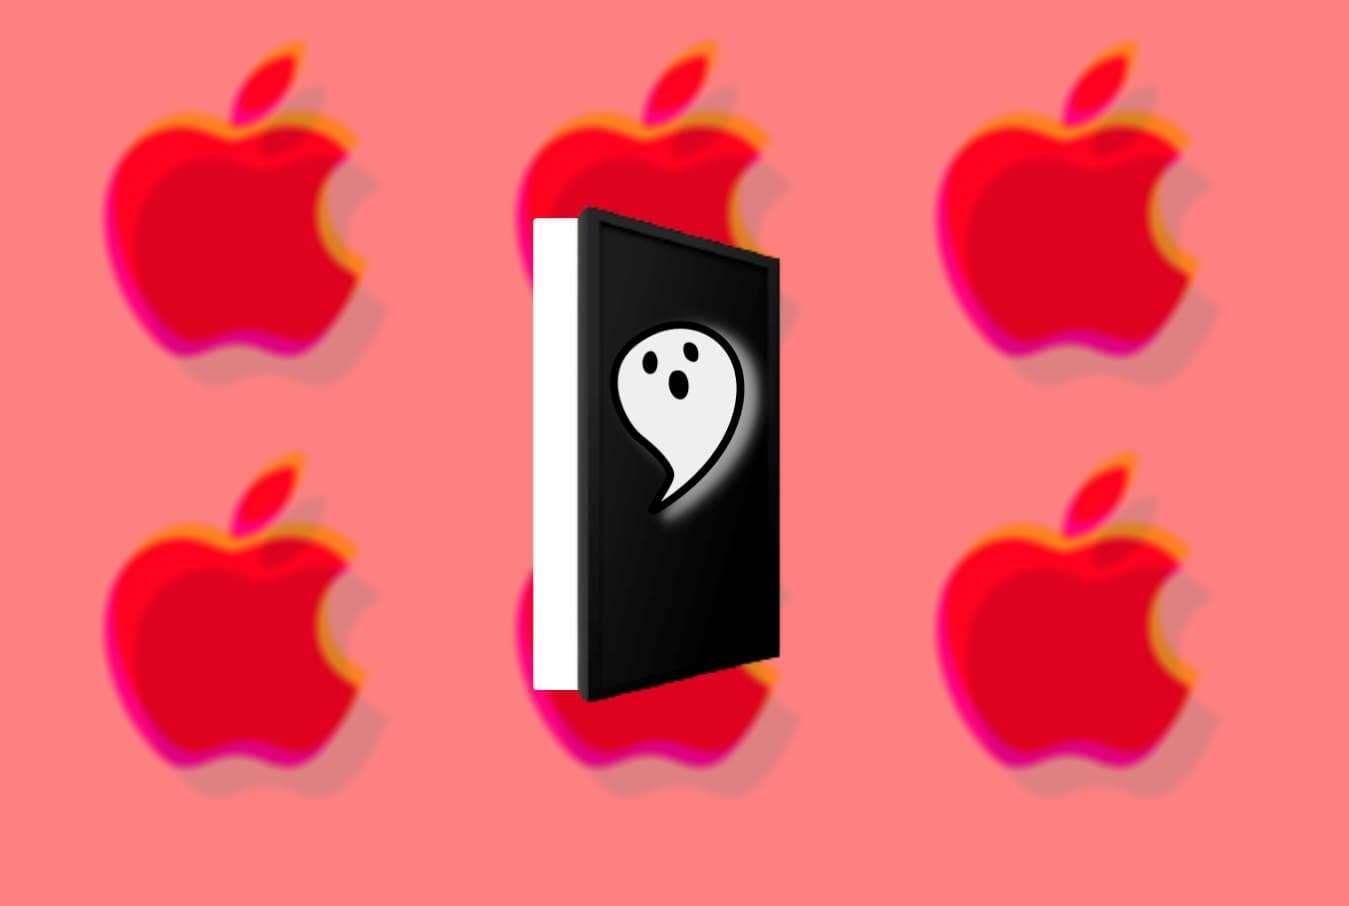 Apple kept mum about XcodeGhost malware attack against 128M users